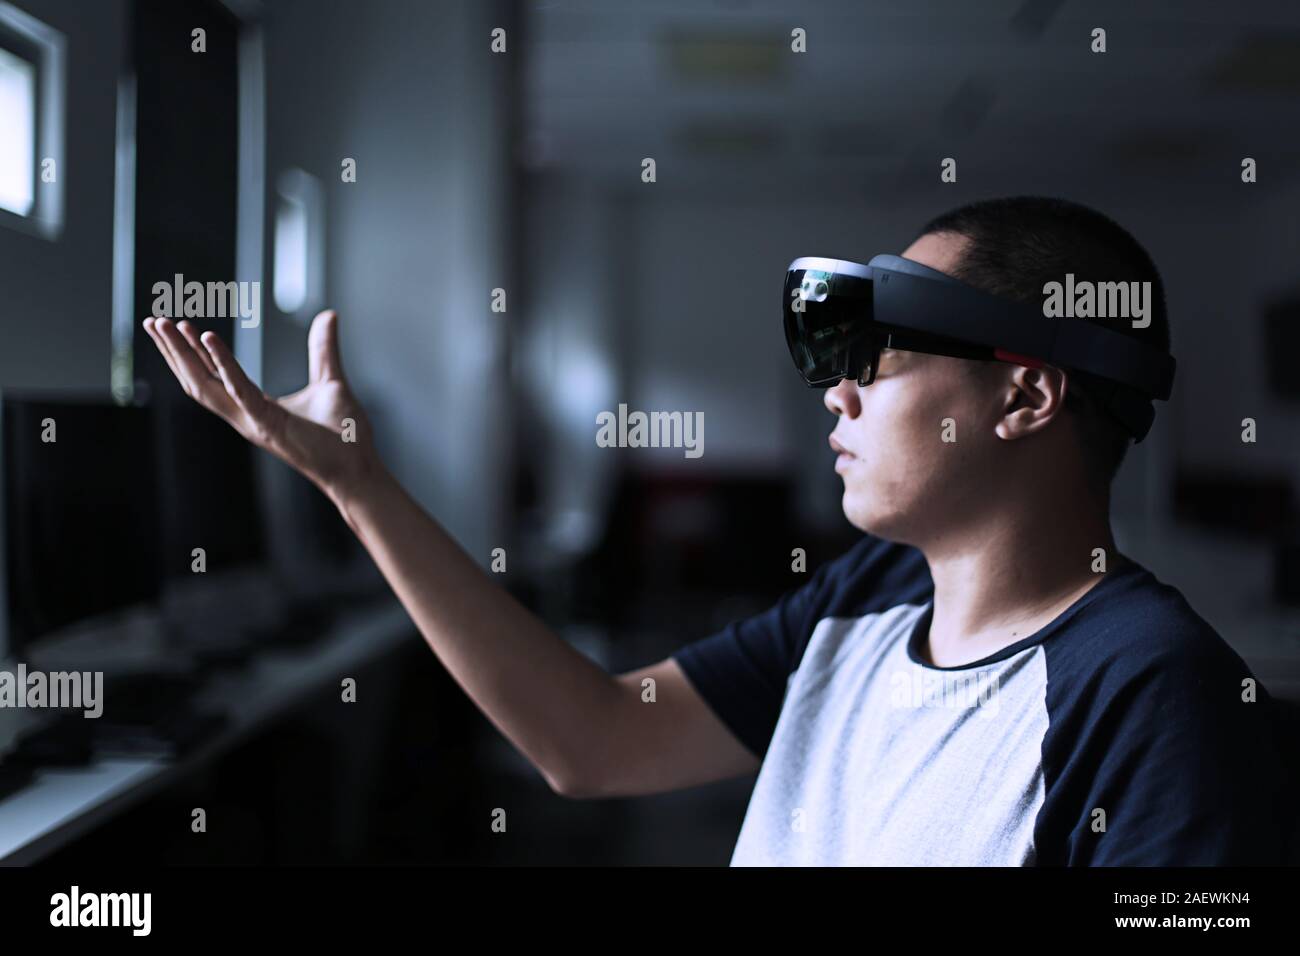 Enter Virtual Reality world with HoloLens 1 glasses no effect in the lab Stock Photo